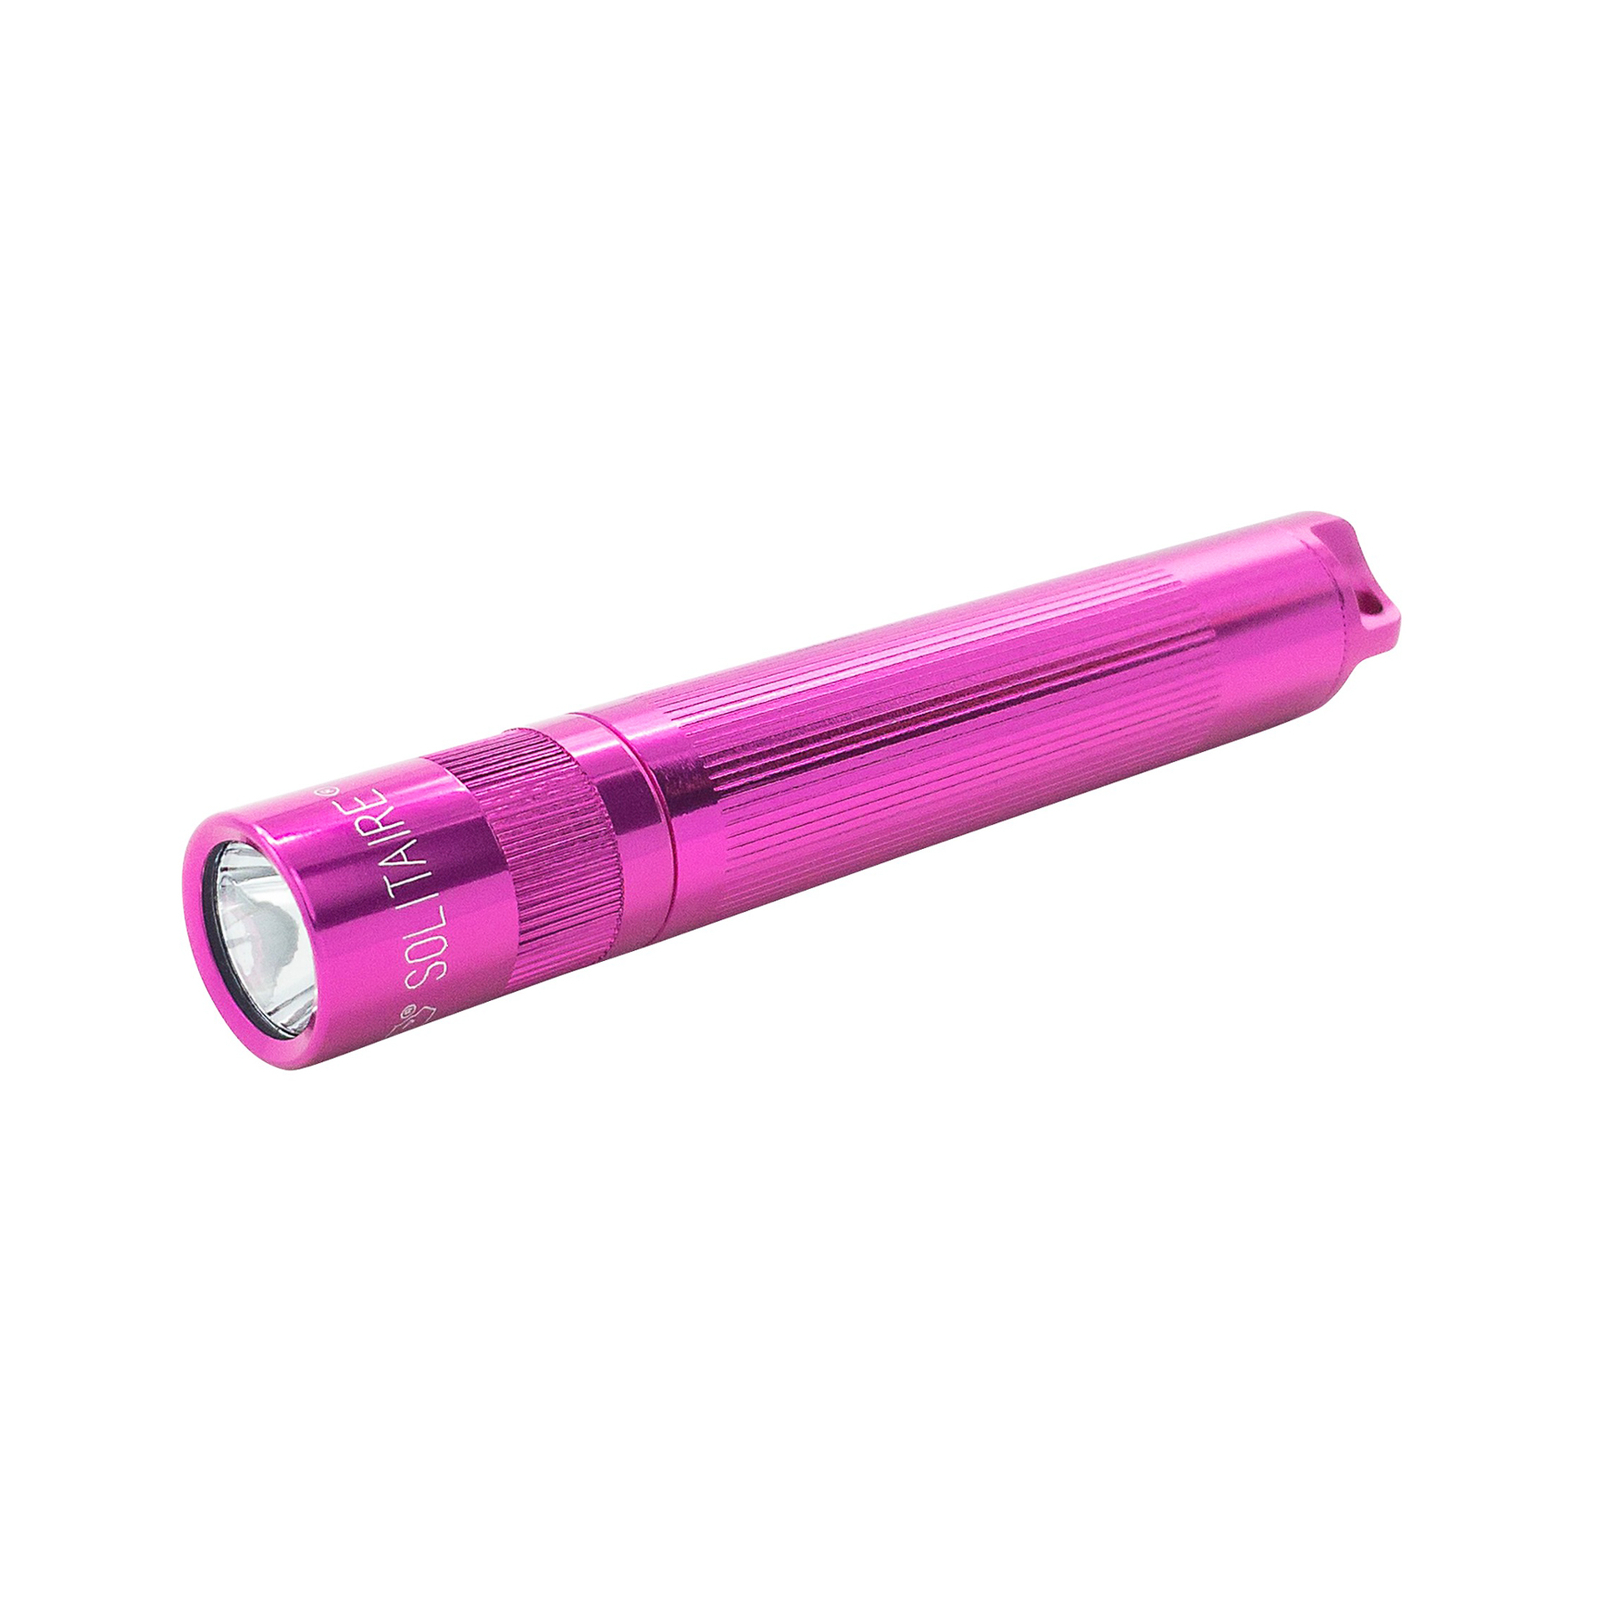 Maglite Xenon-lommelykt Solitaire 1-Cell AAA, eske, rosa